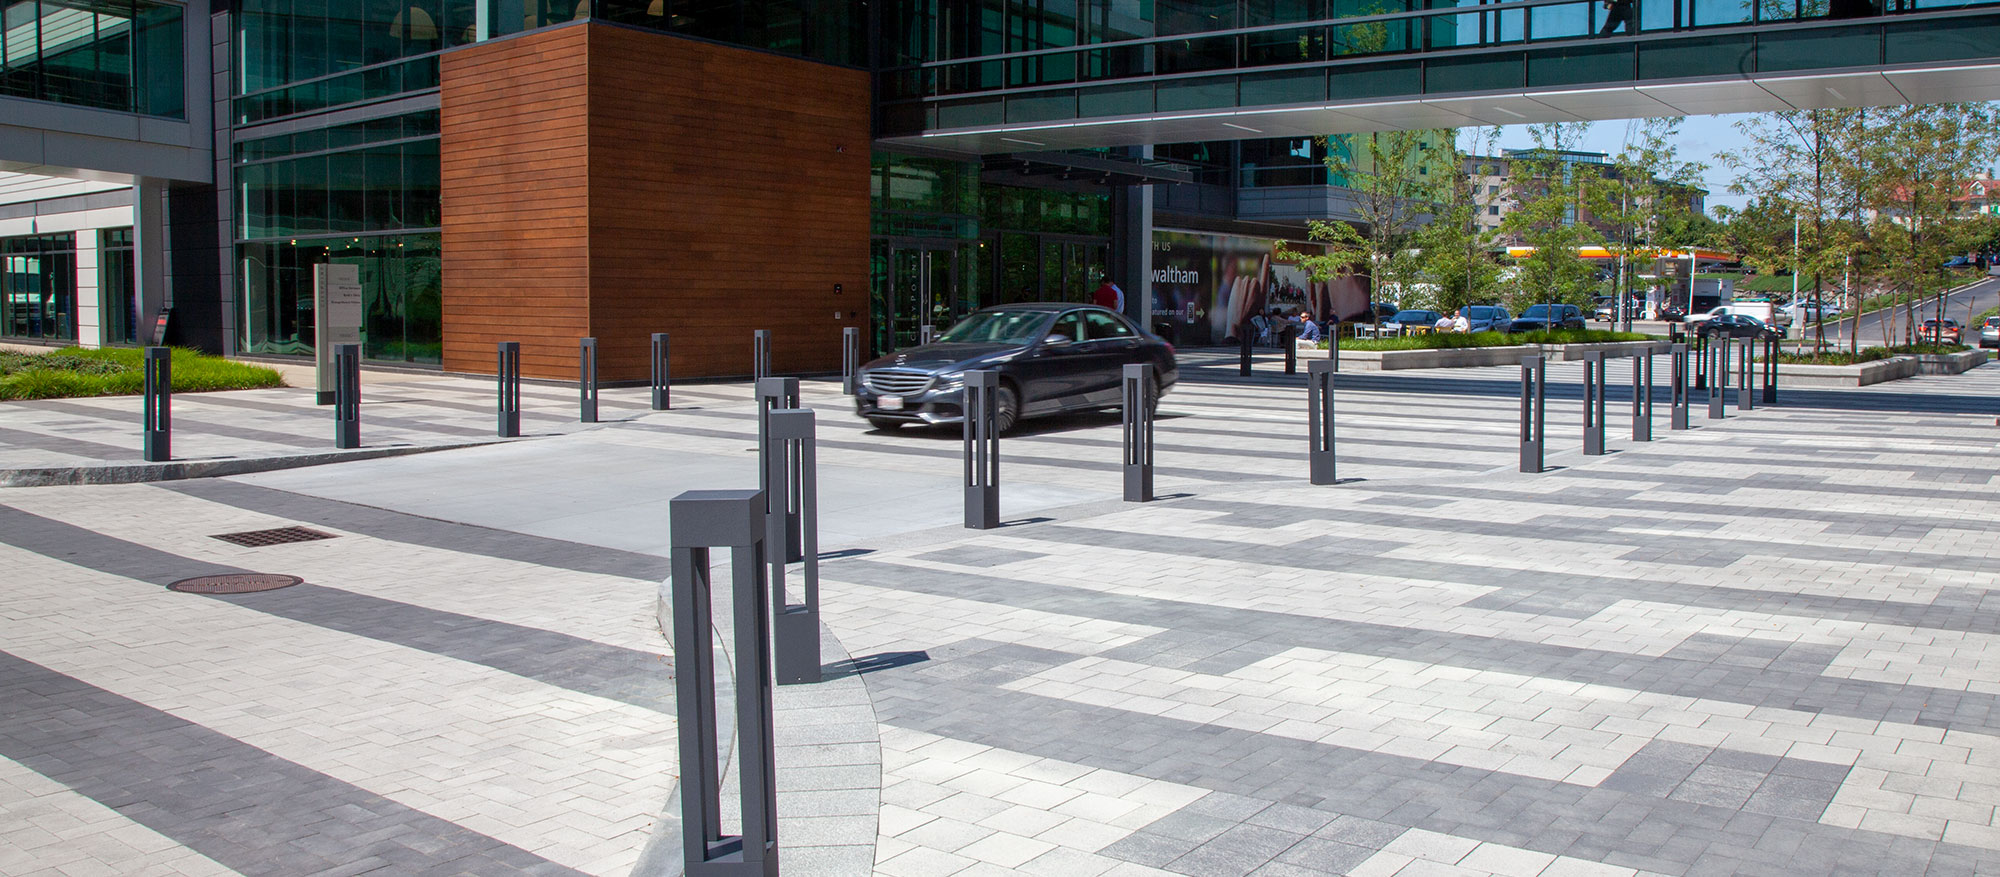 Unilock Umbriano pavers in contrasting colors and patterns delineate areas for pedestrians and cars between buildings connected by a bridge.